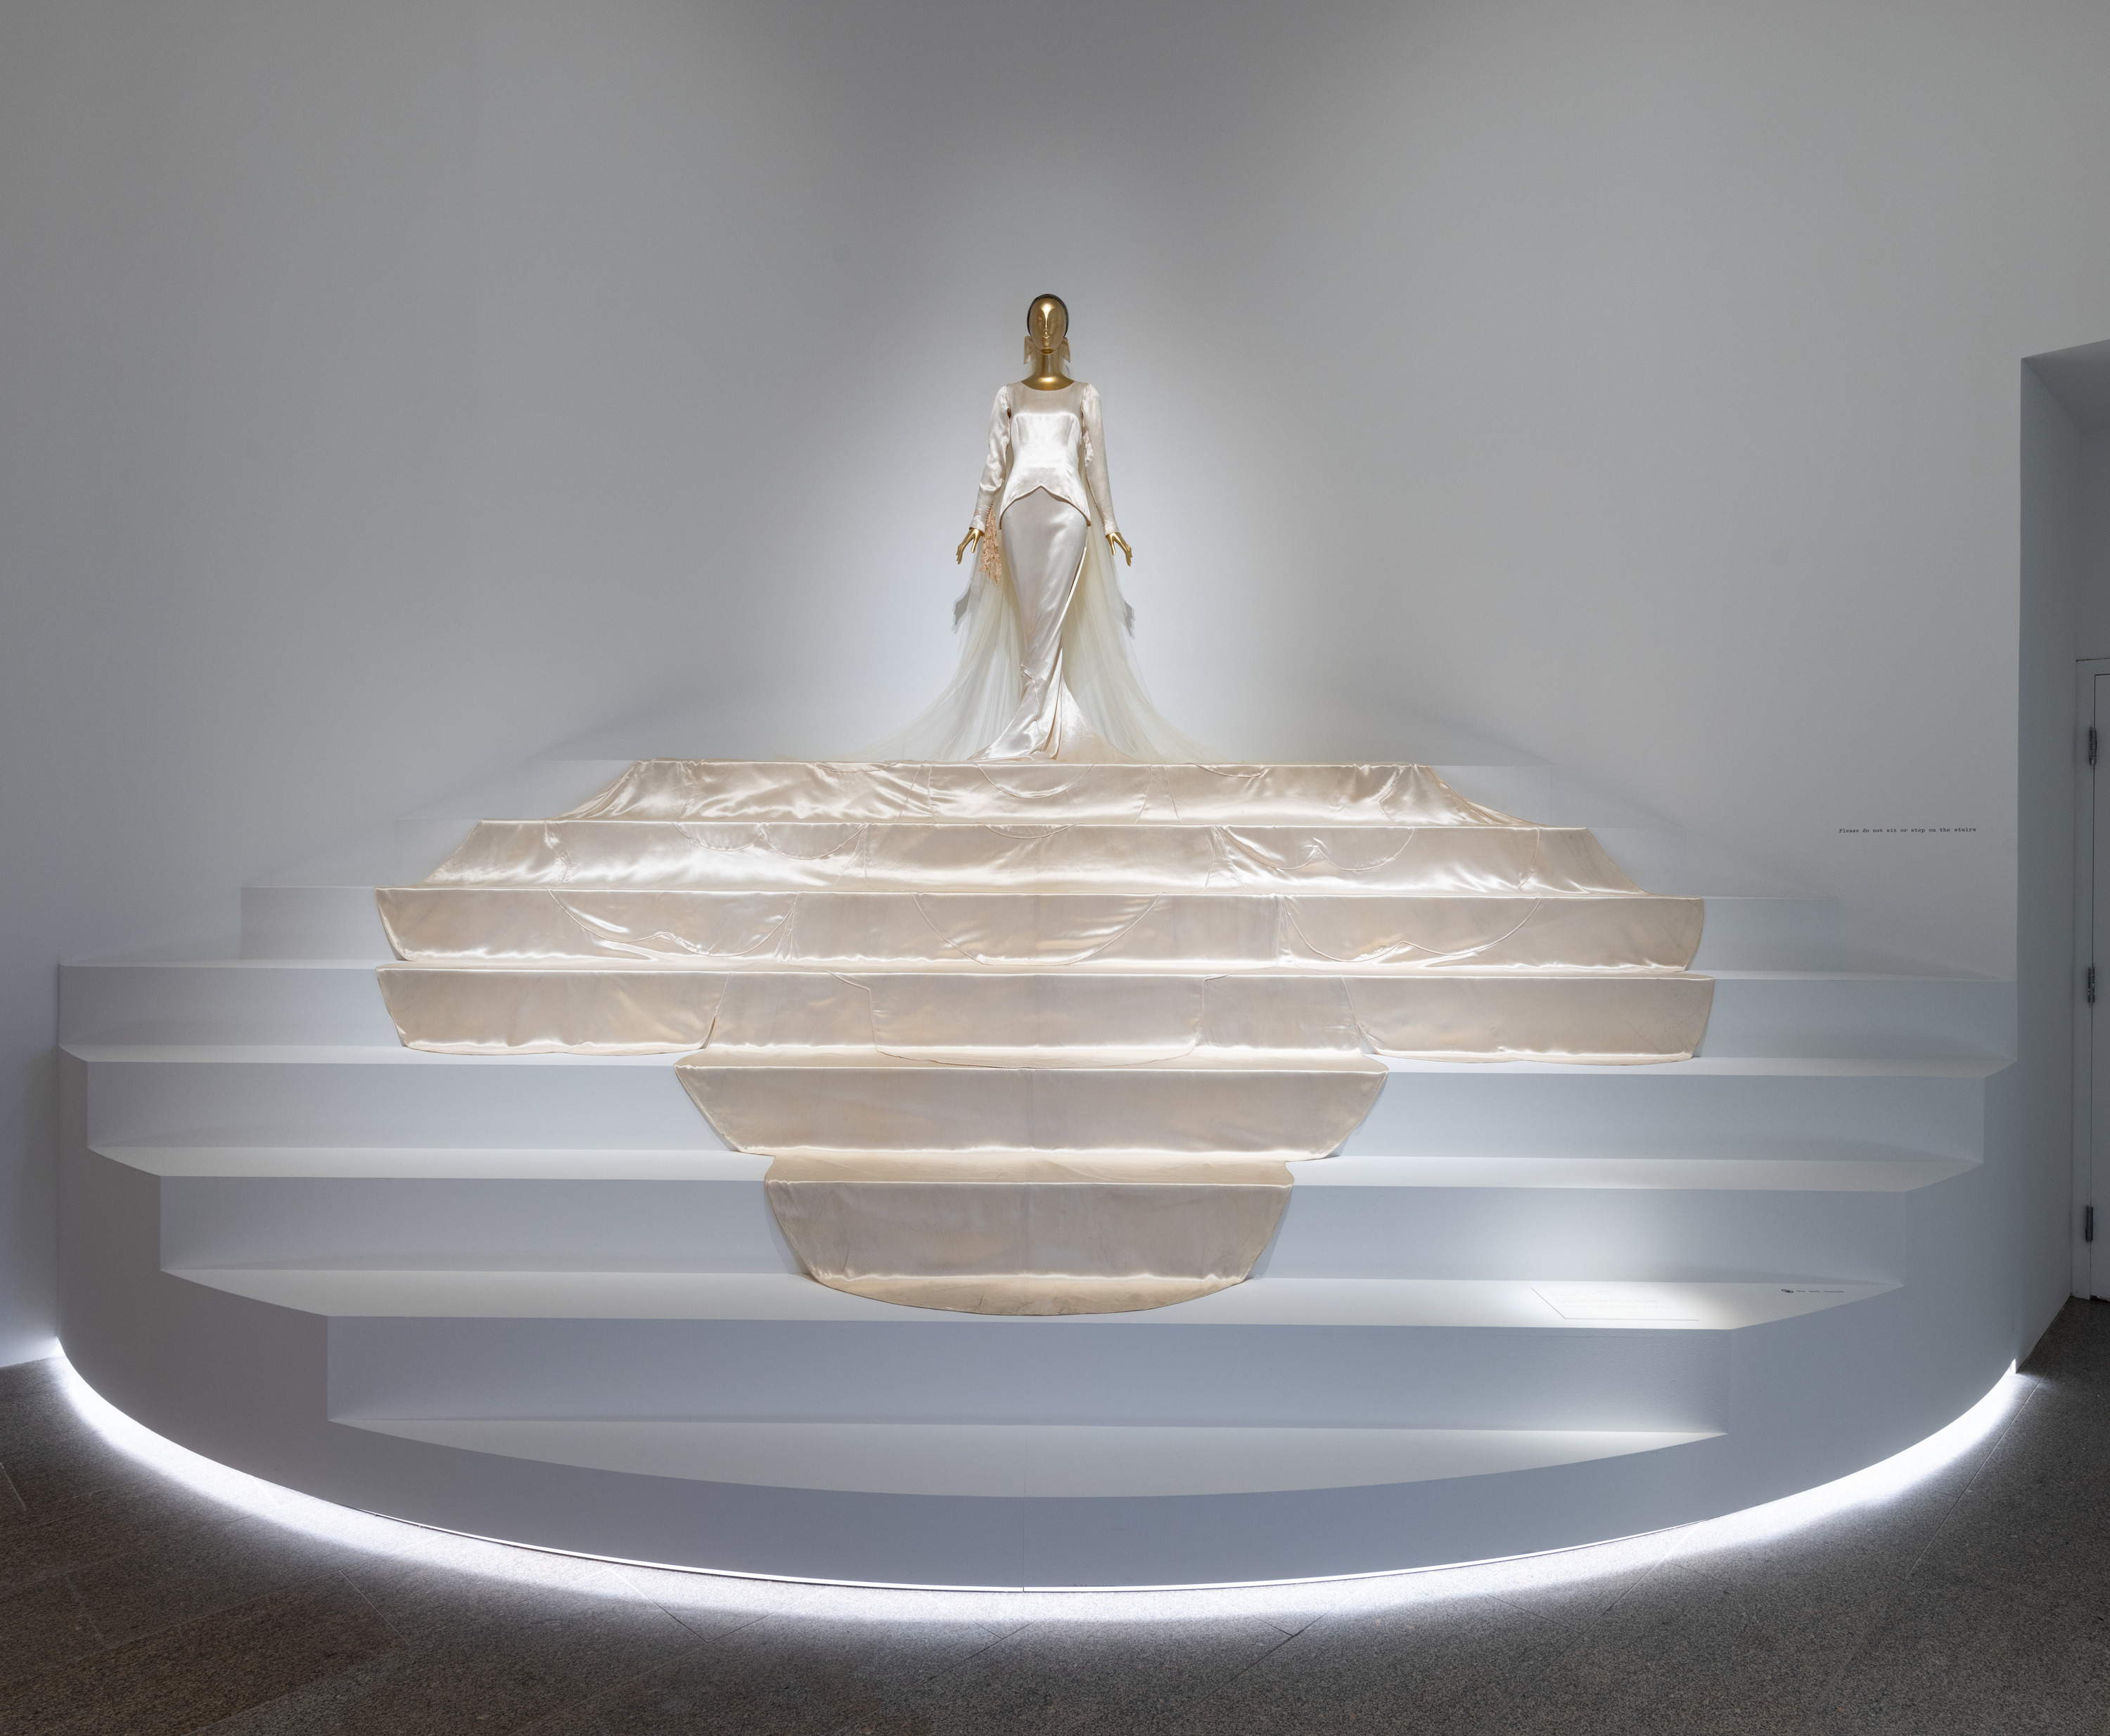 A Depression-era wedding gown displayed on a staircase.